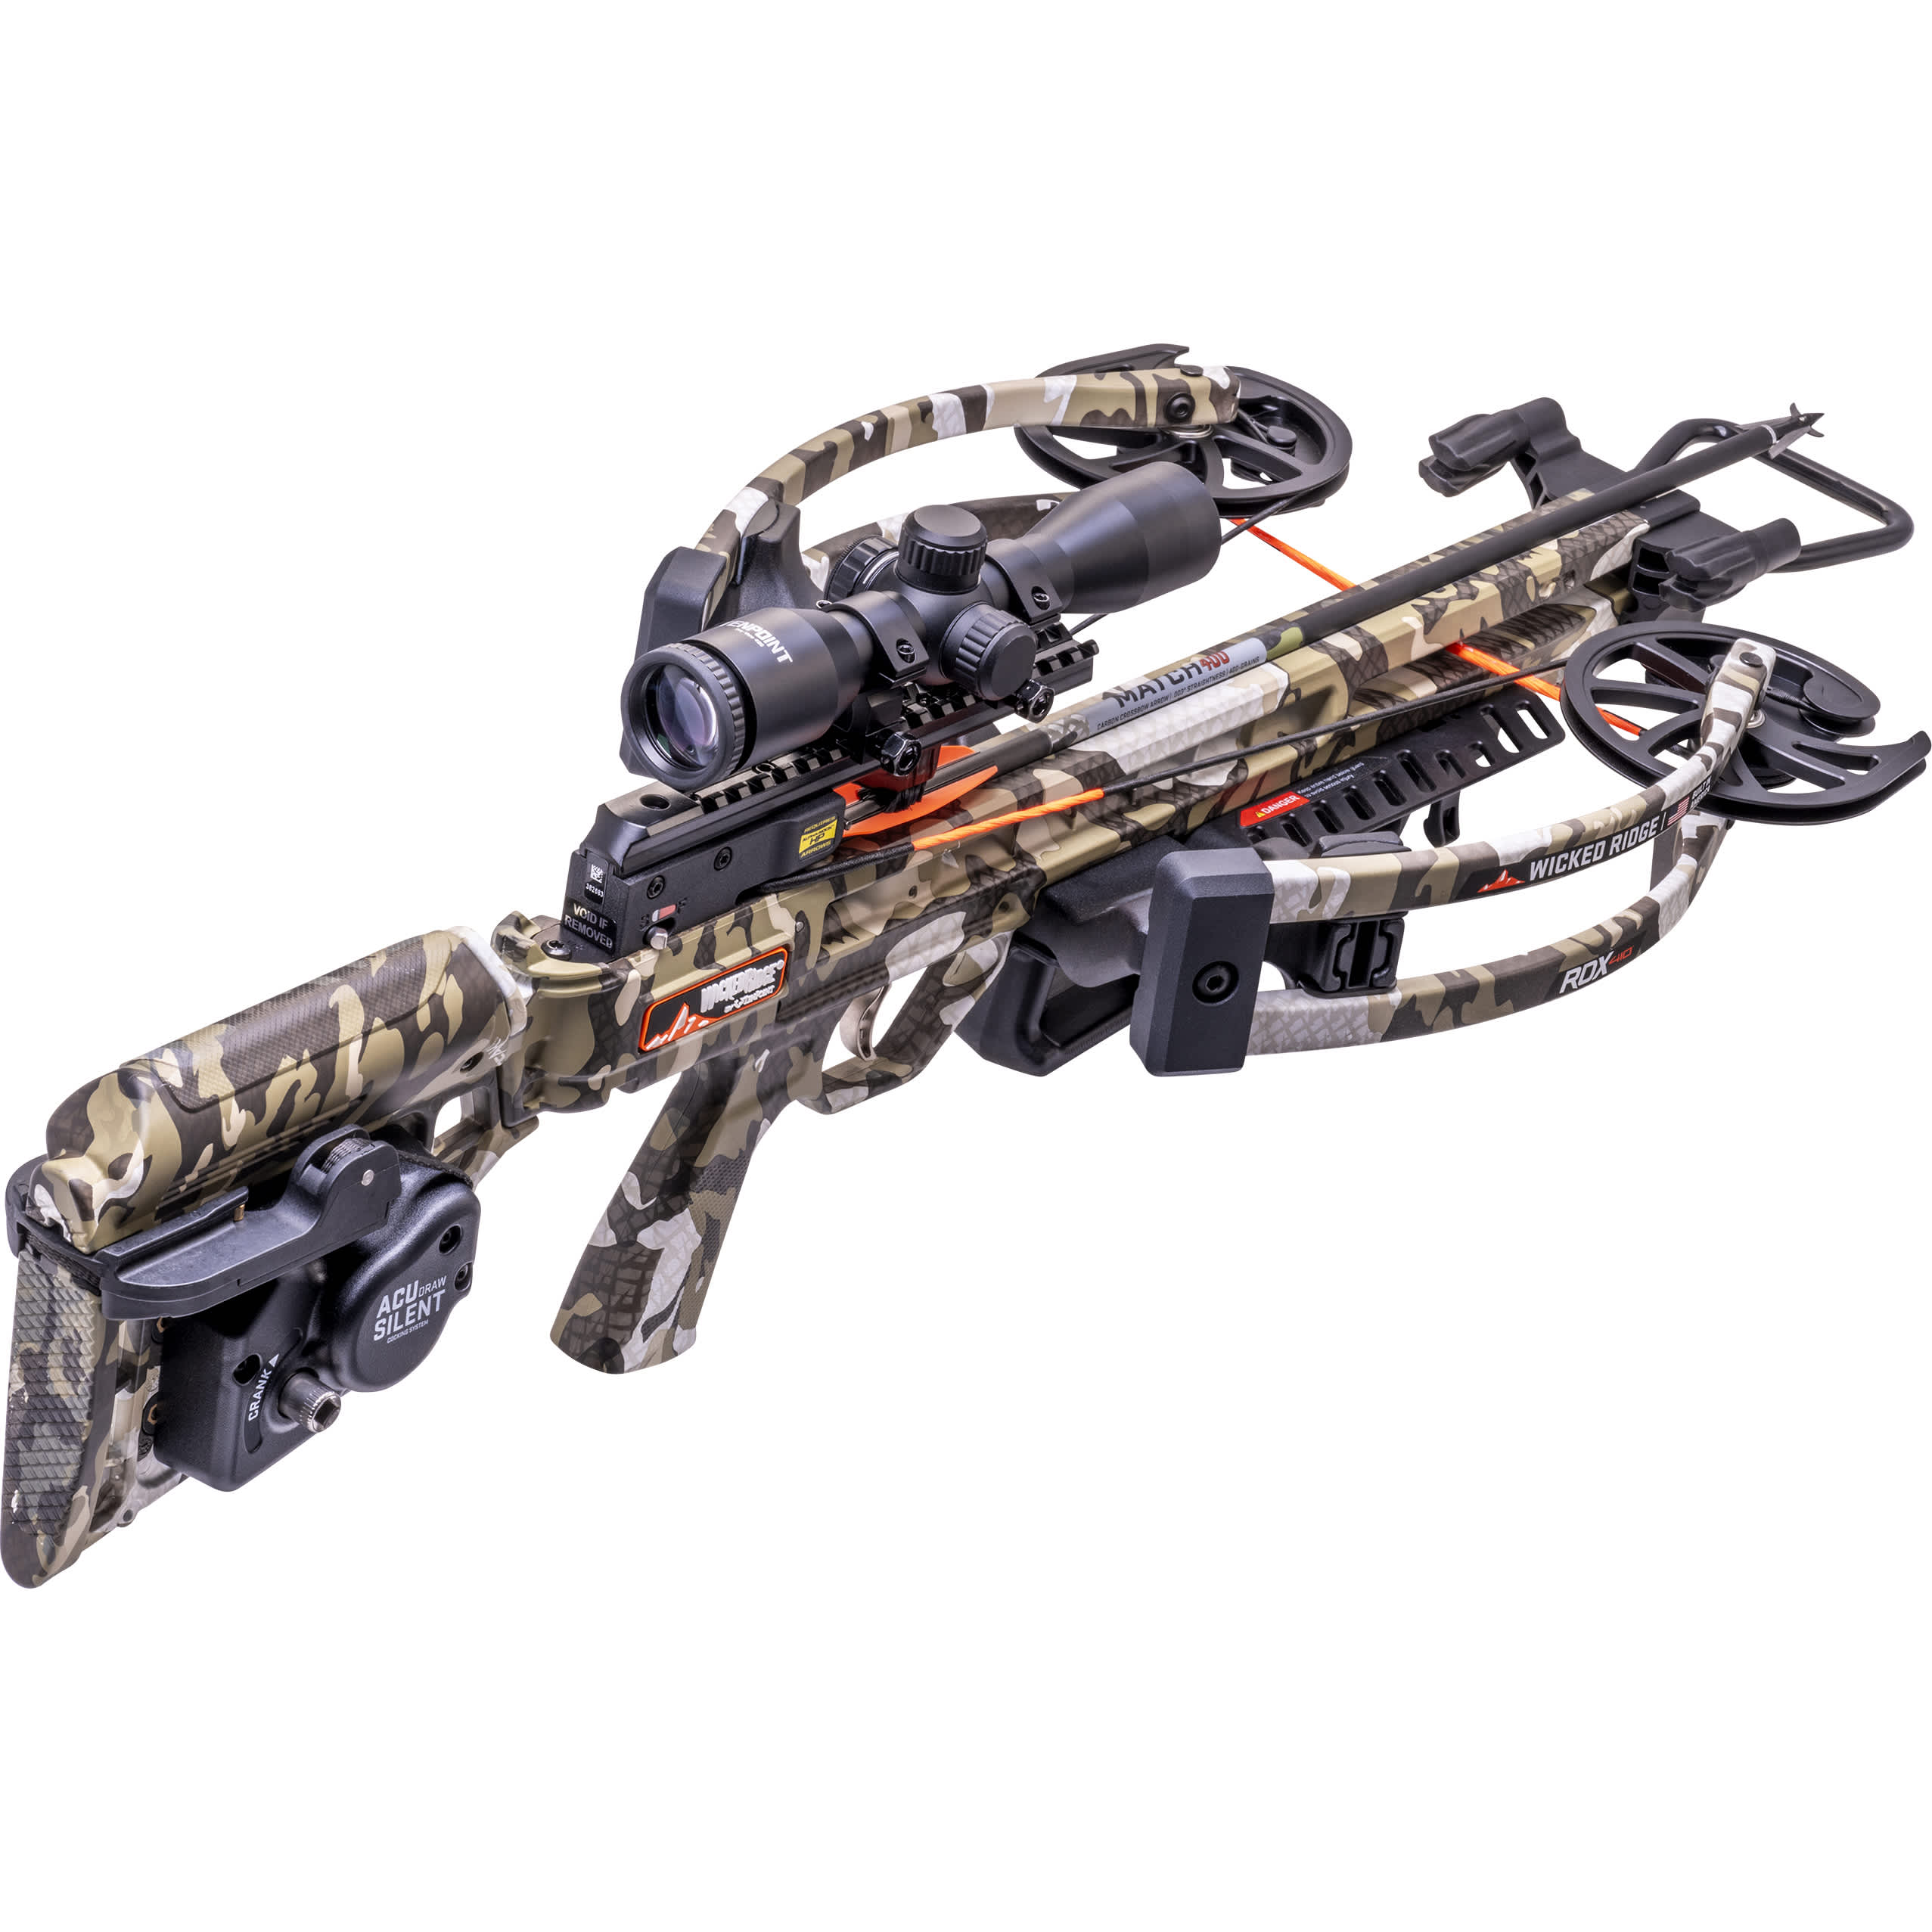 Wicked Ridge RDX 410 Crossbow Package with ACUdraw Silent & ProView 400 Scope